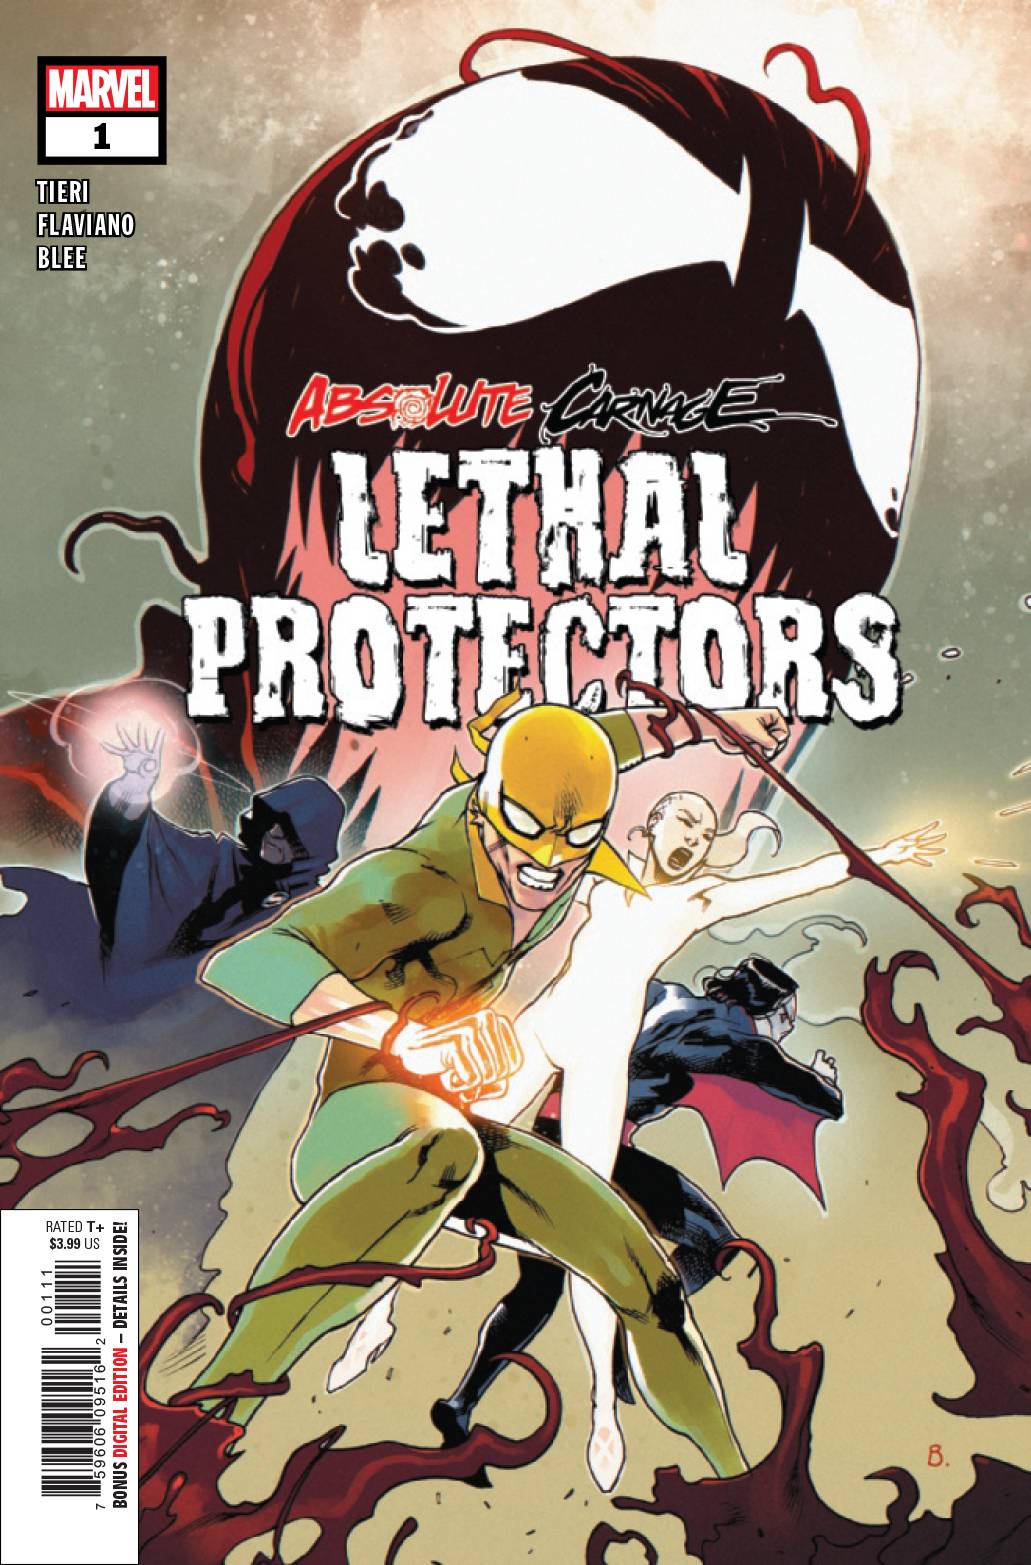 ABSOLUTE CARNAGE LETHAL PROTECTORS #1 (OF 3) 2019